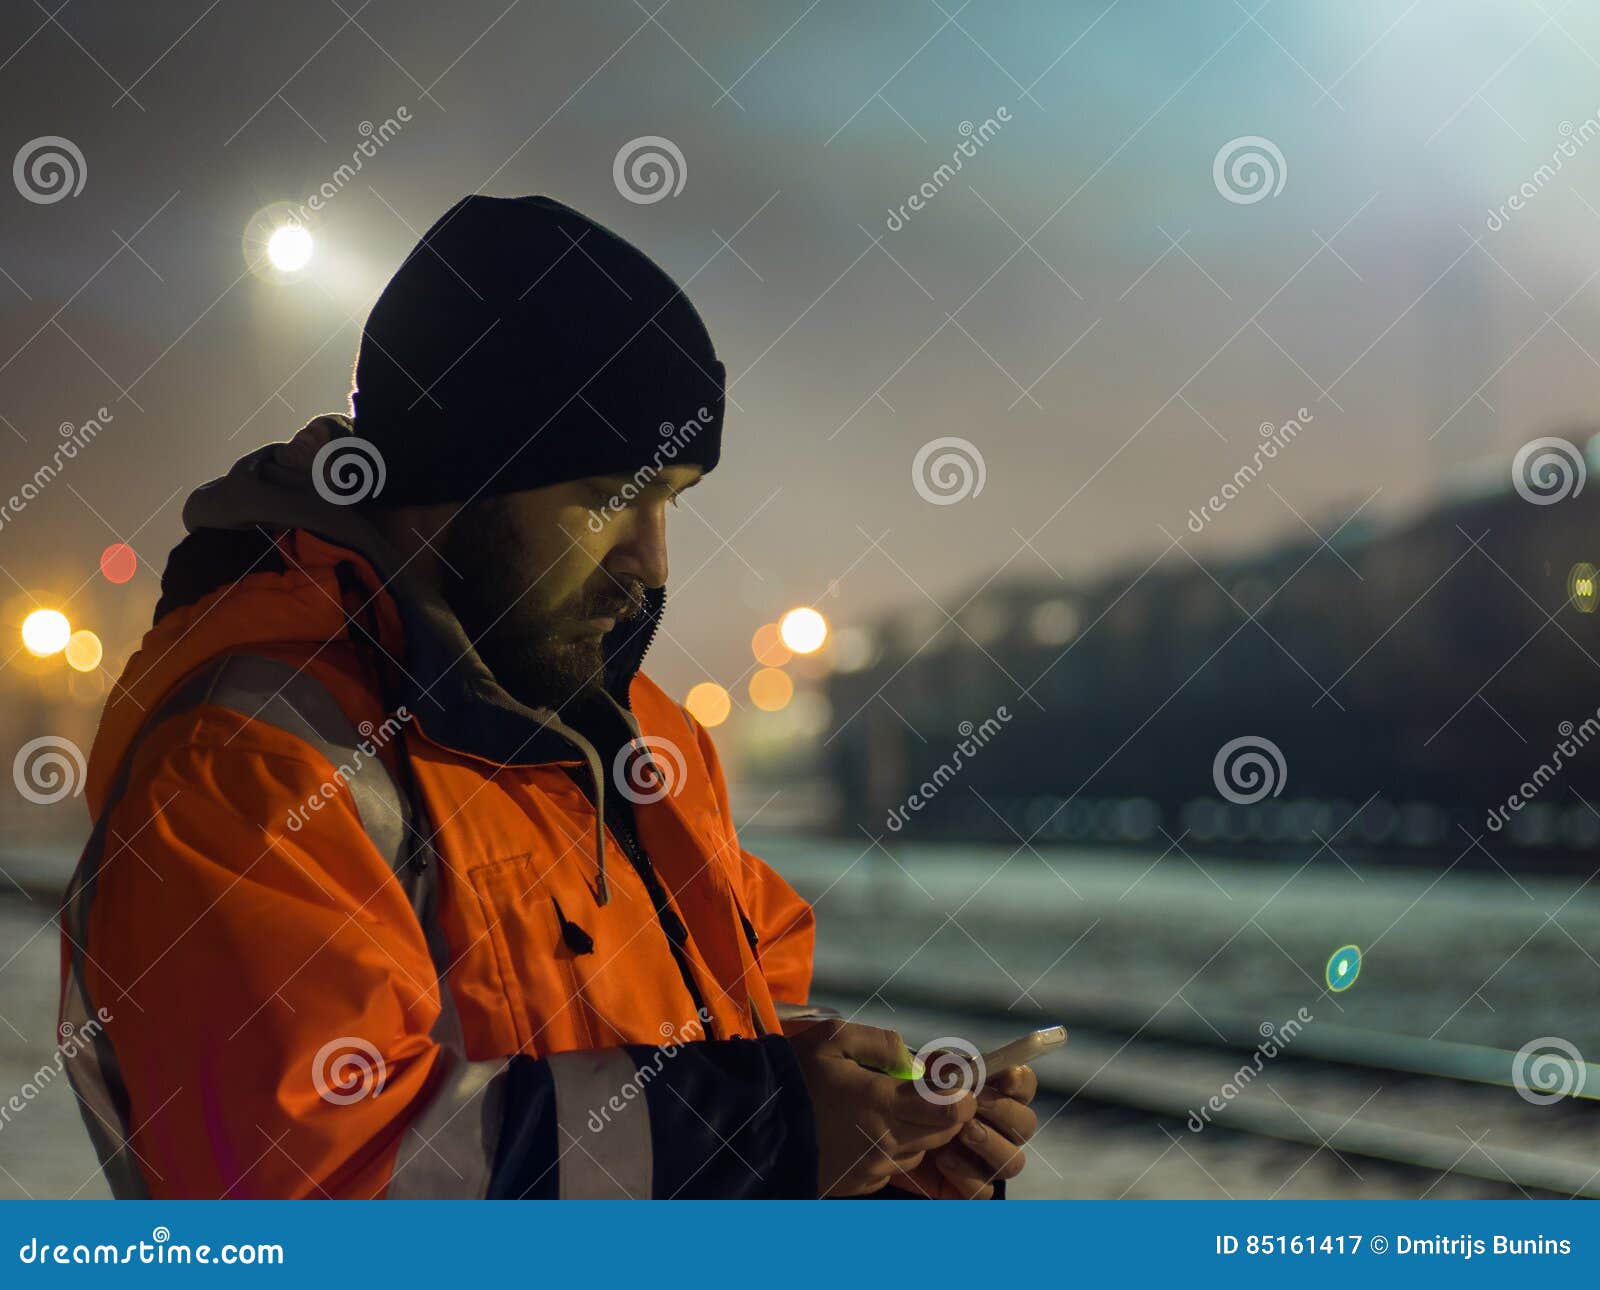 worker using smartphone in the twilight. concept of night shift